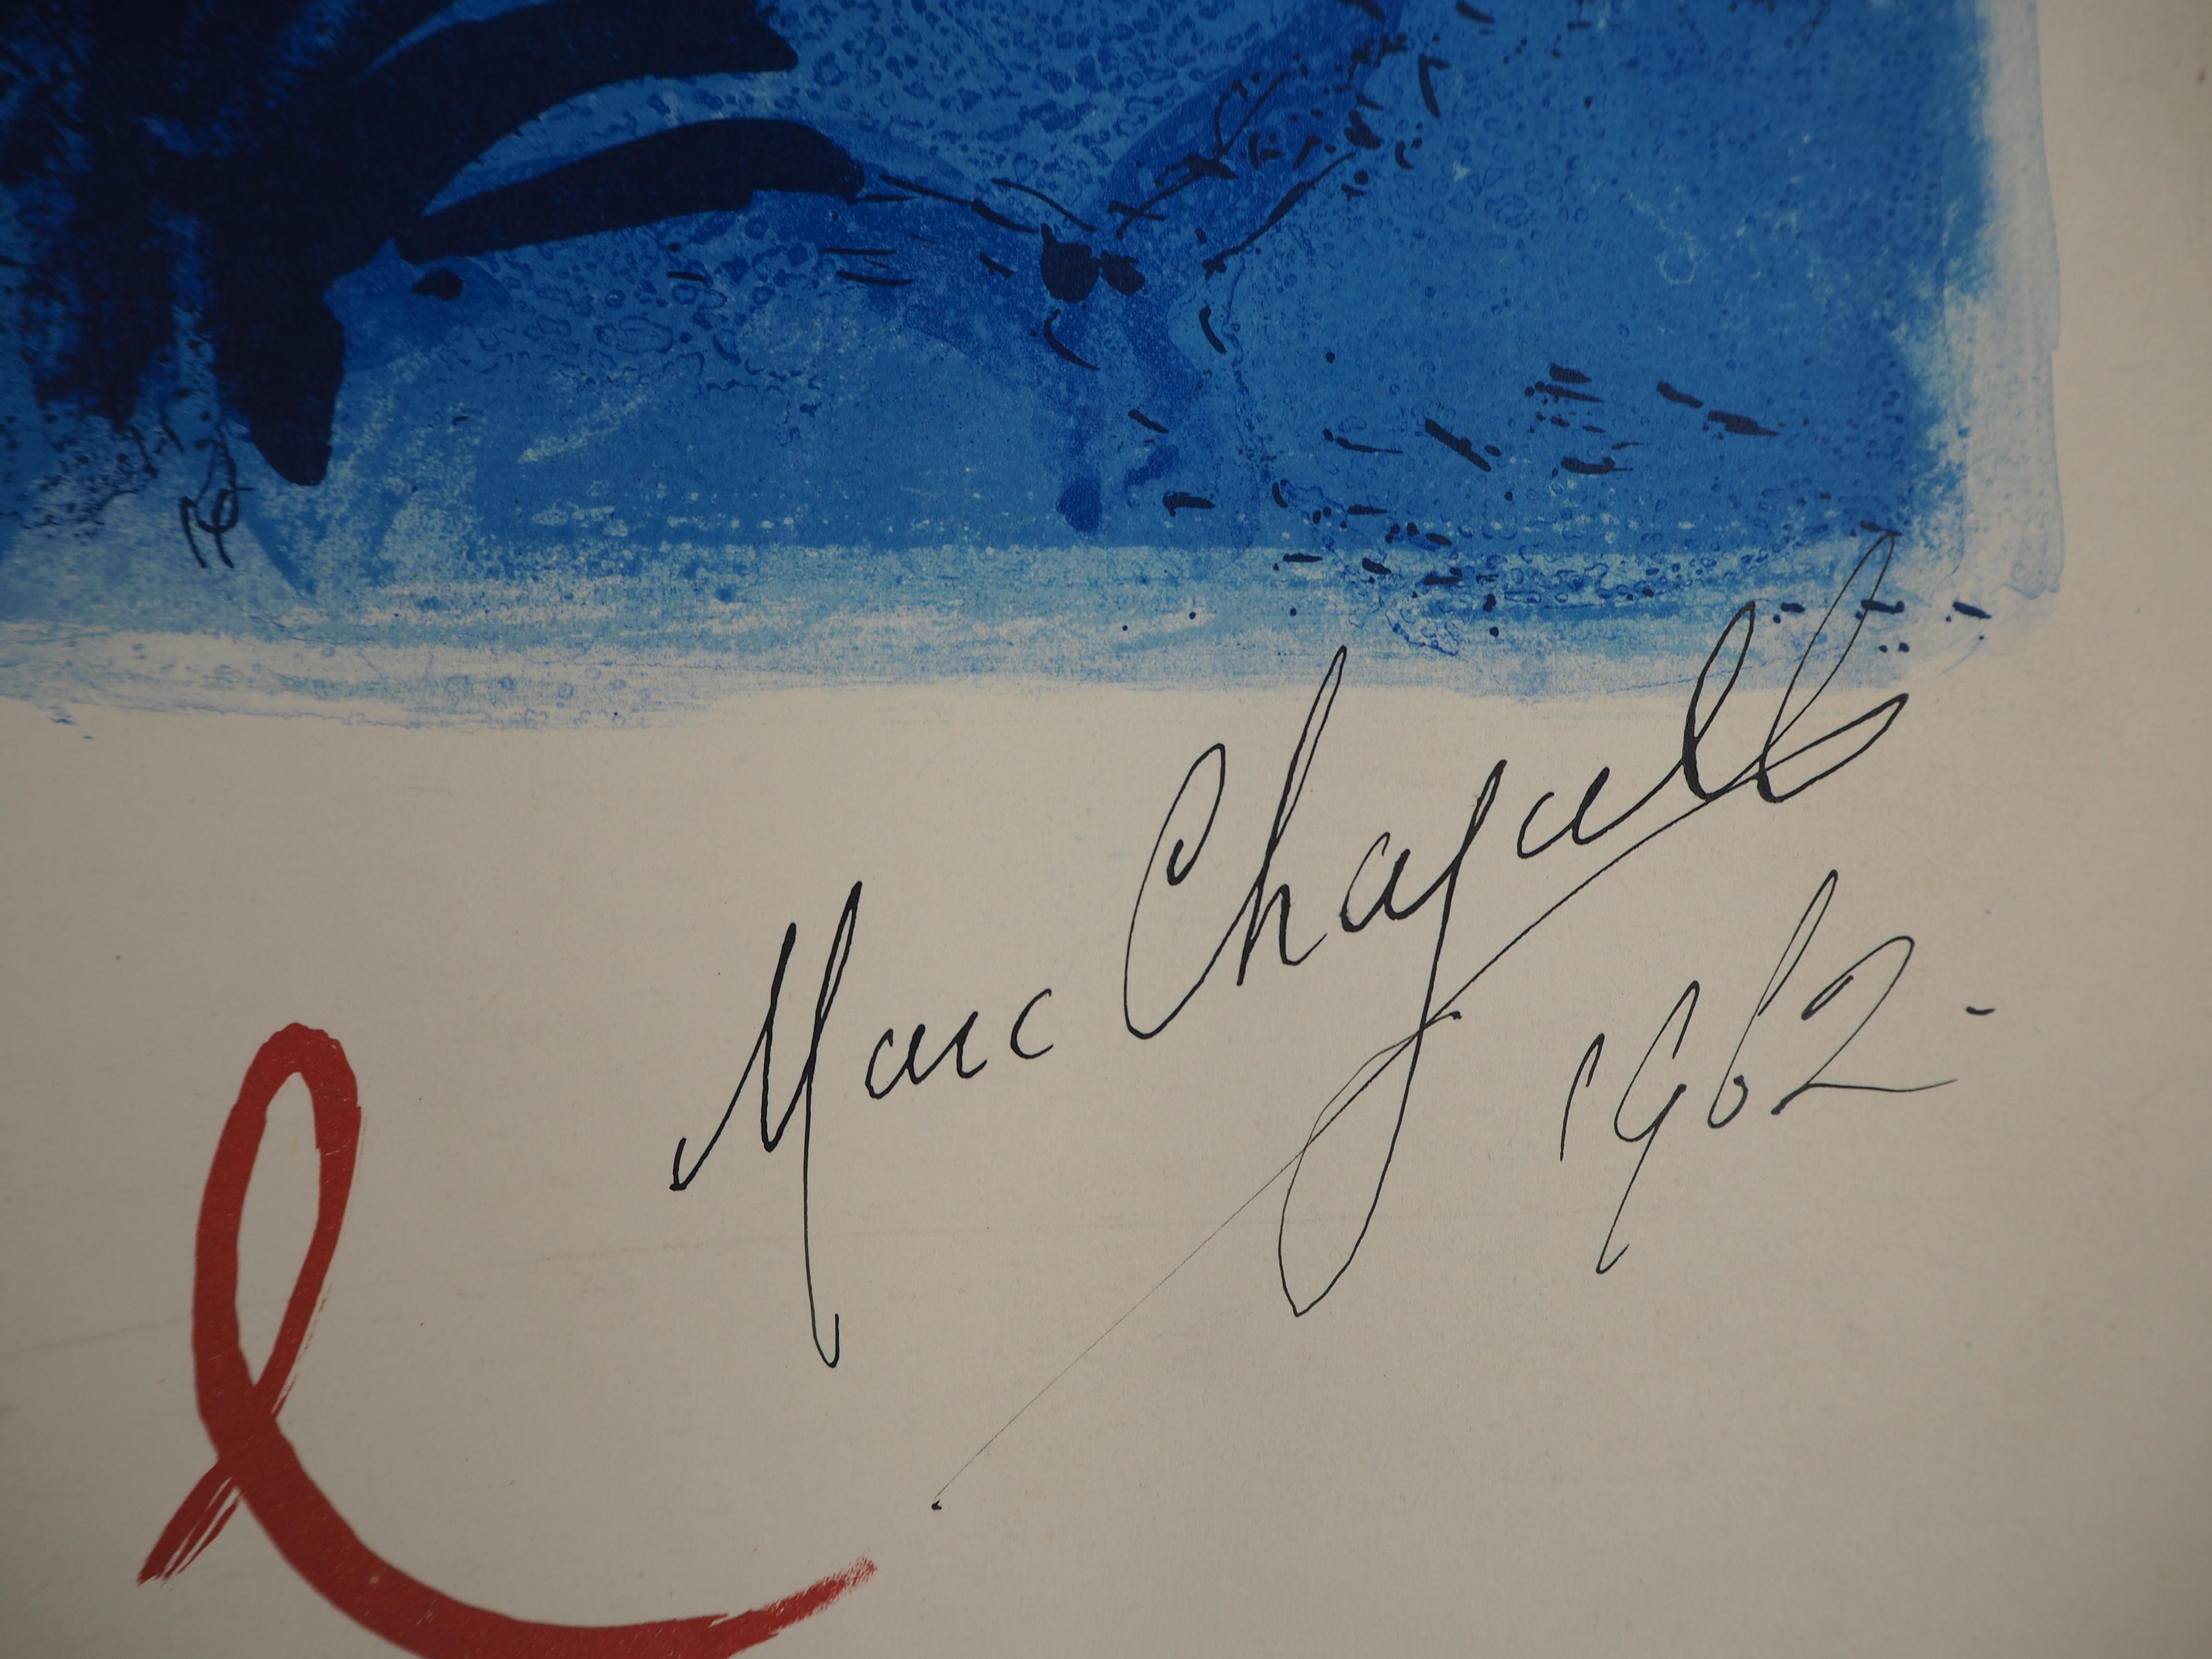 Nice, Bay of Angels - Original lithograph poster, Handsigned - Mourlot #350 - Print by Marc Chagall